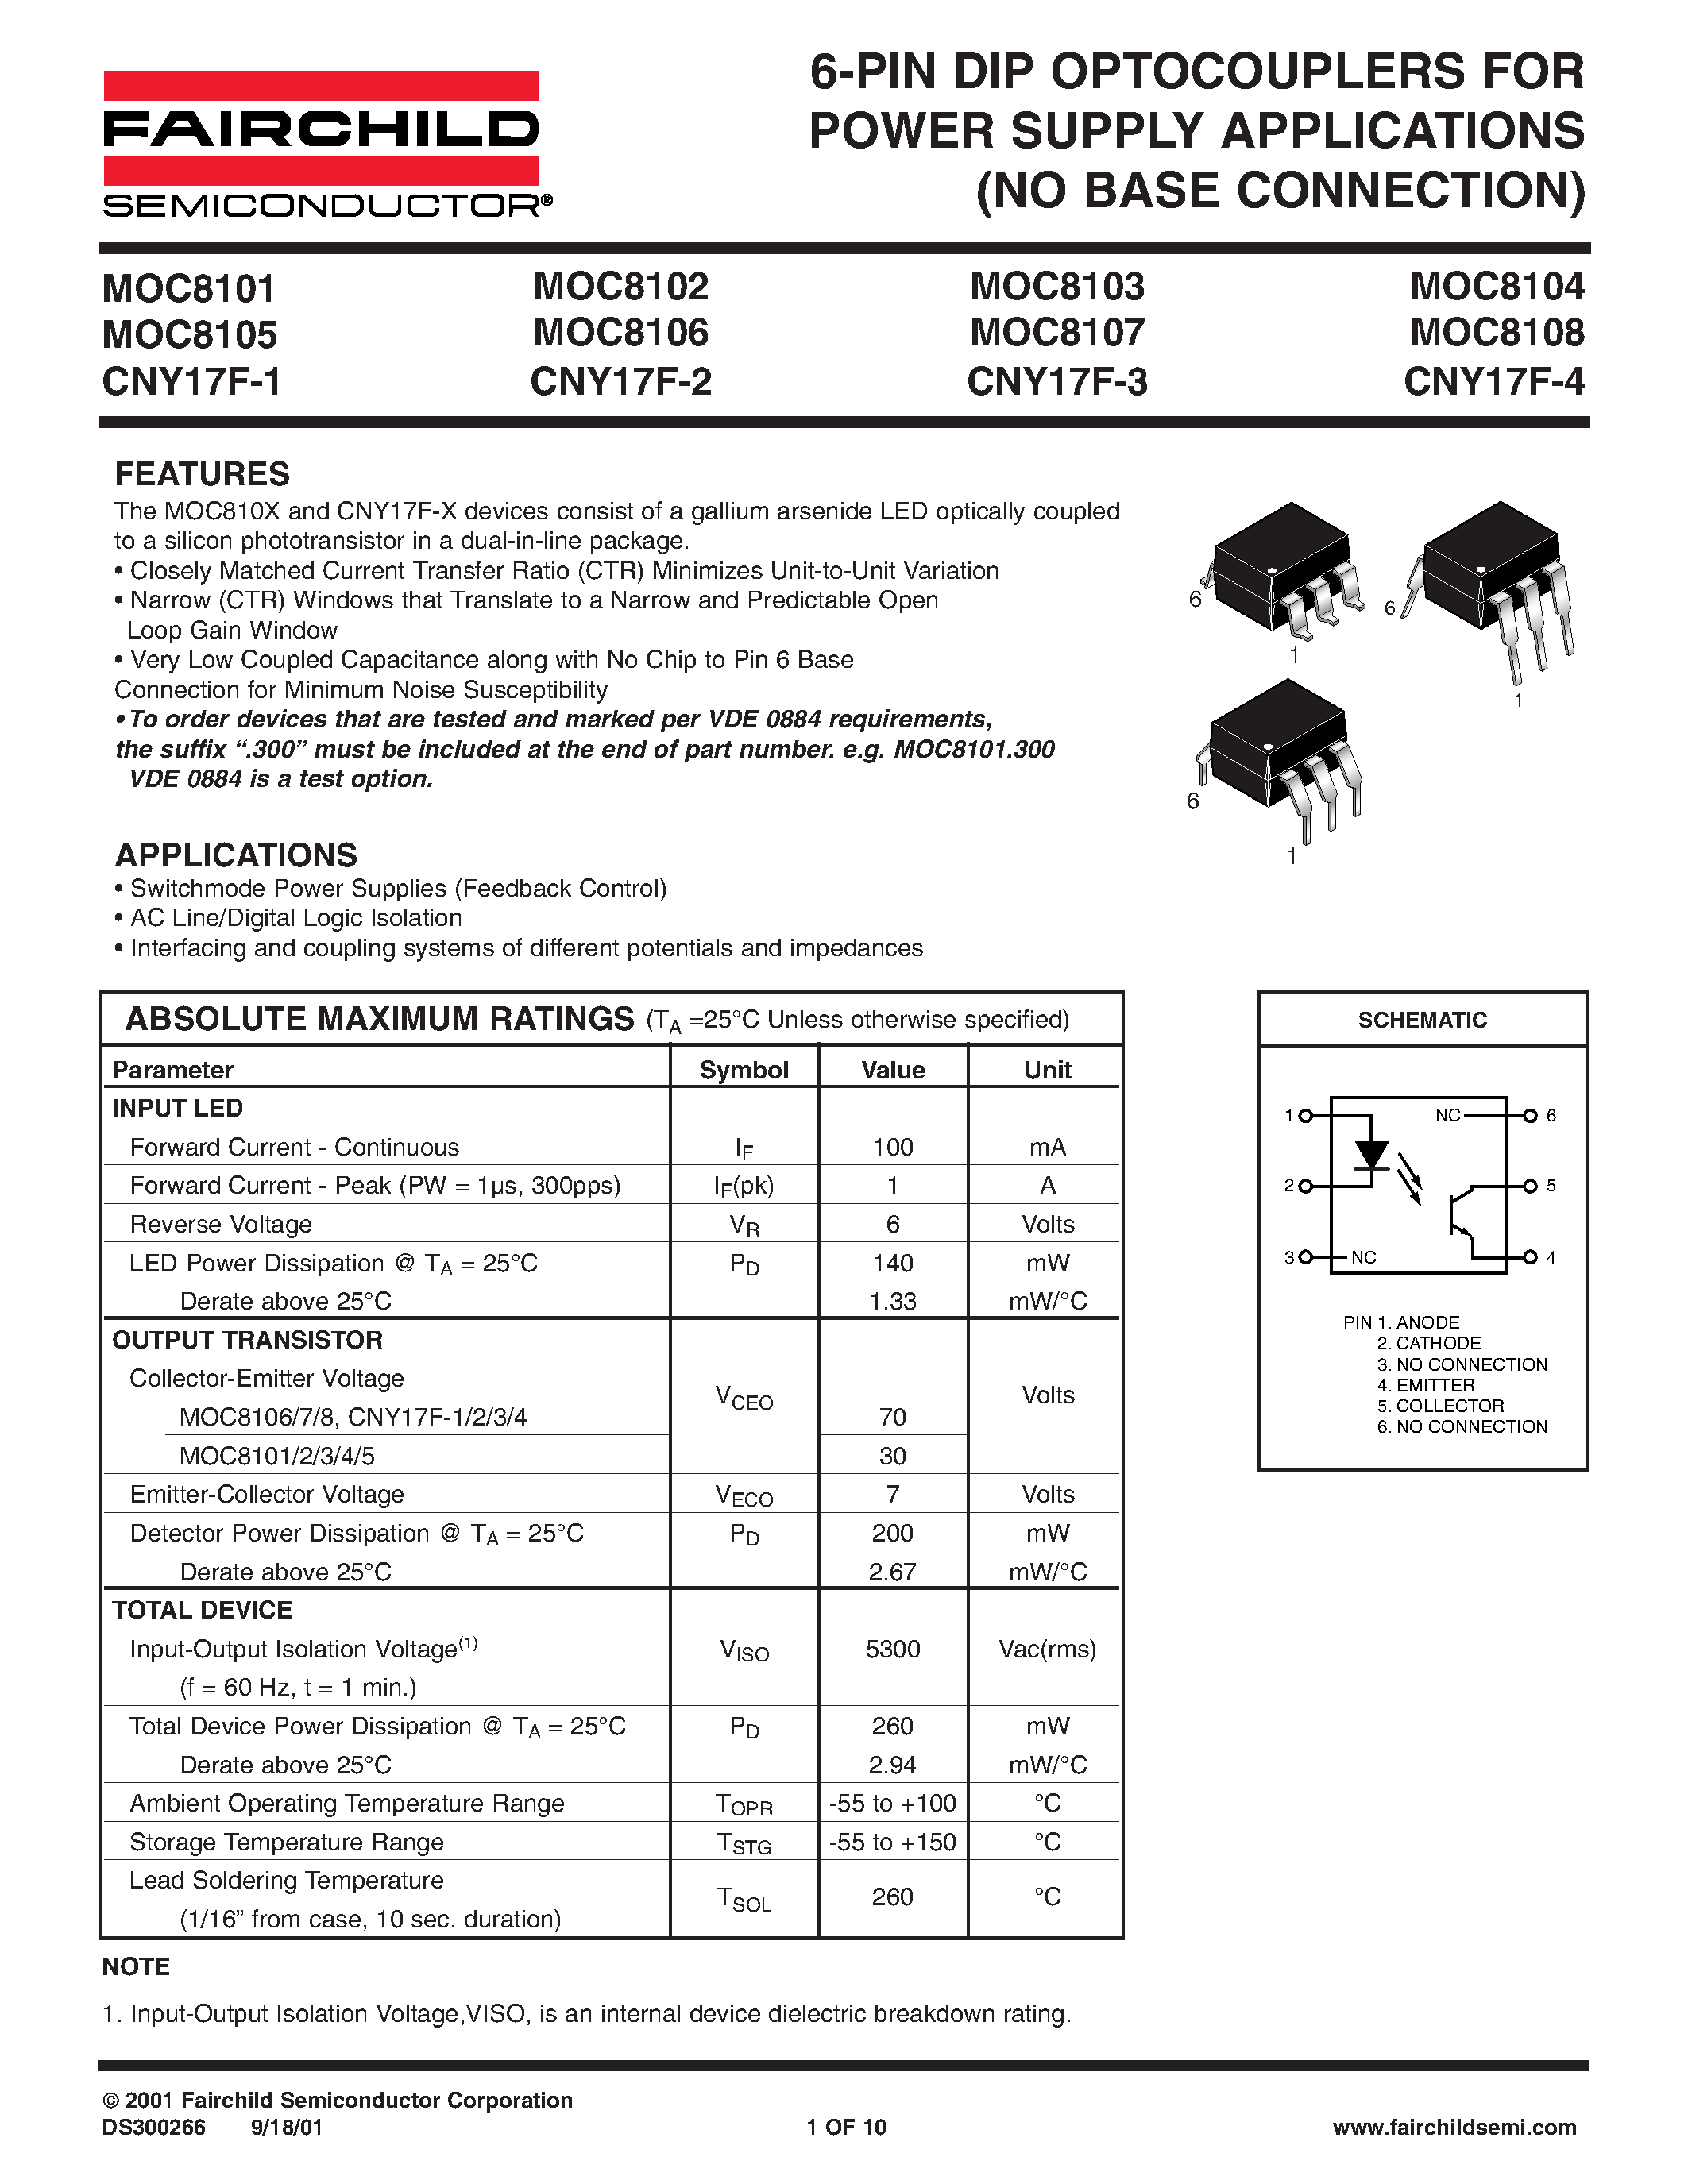 Datasheet MOC810x - 6-PIN DIP OPTOCOUPLERS FOR POWER SUPPLY APPLICATIONS (NO BASE CONNECTION) page 1